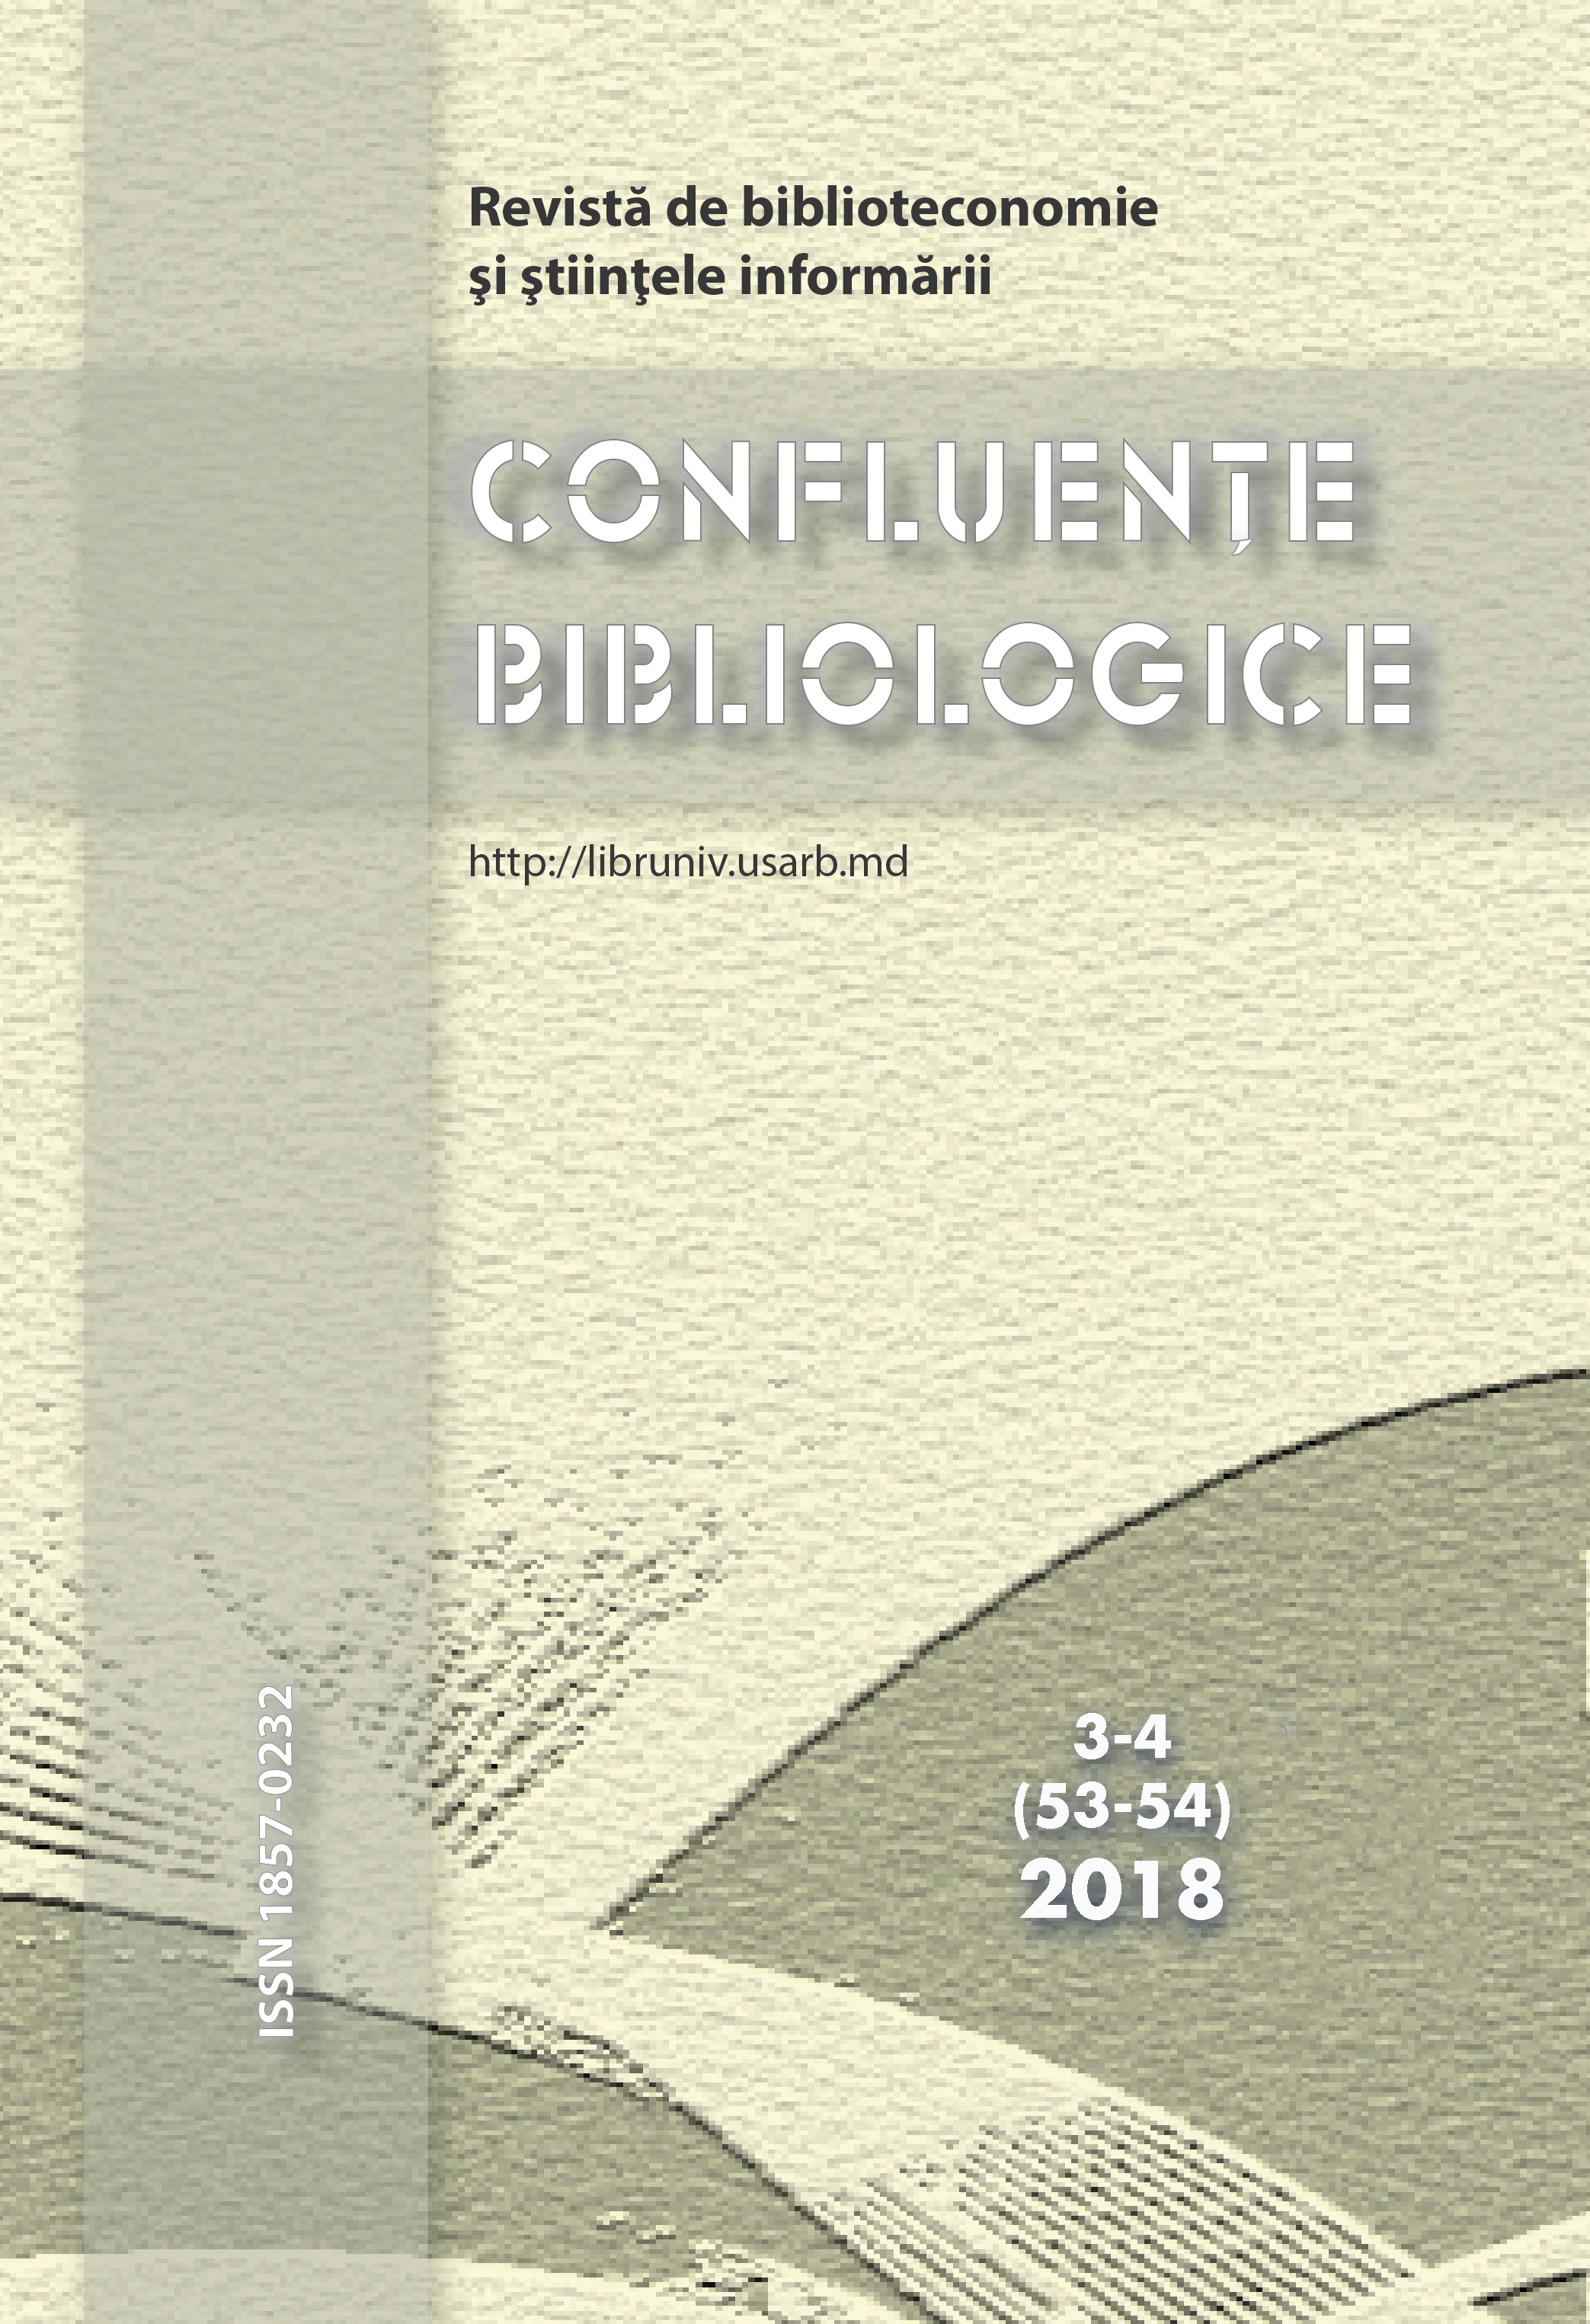 The library and information sciences section within the annual Colloquia Professorum on Tradition and innovation in scientific research Cover Image